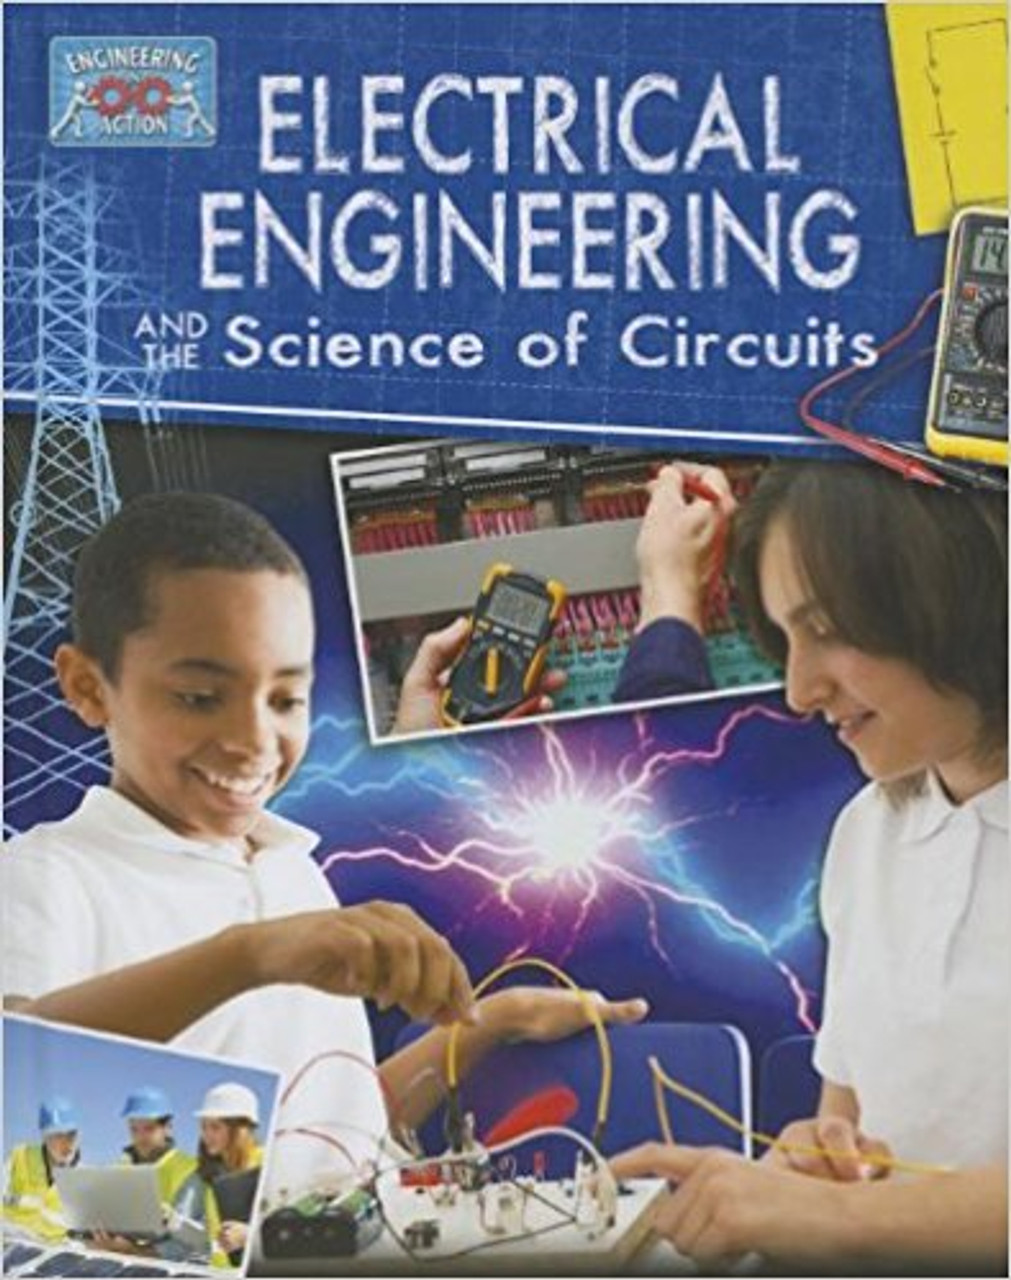 Electrical Engineering and the Science of Circuits (Paperback) by James Bow